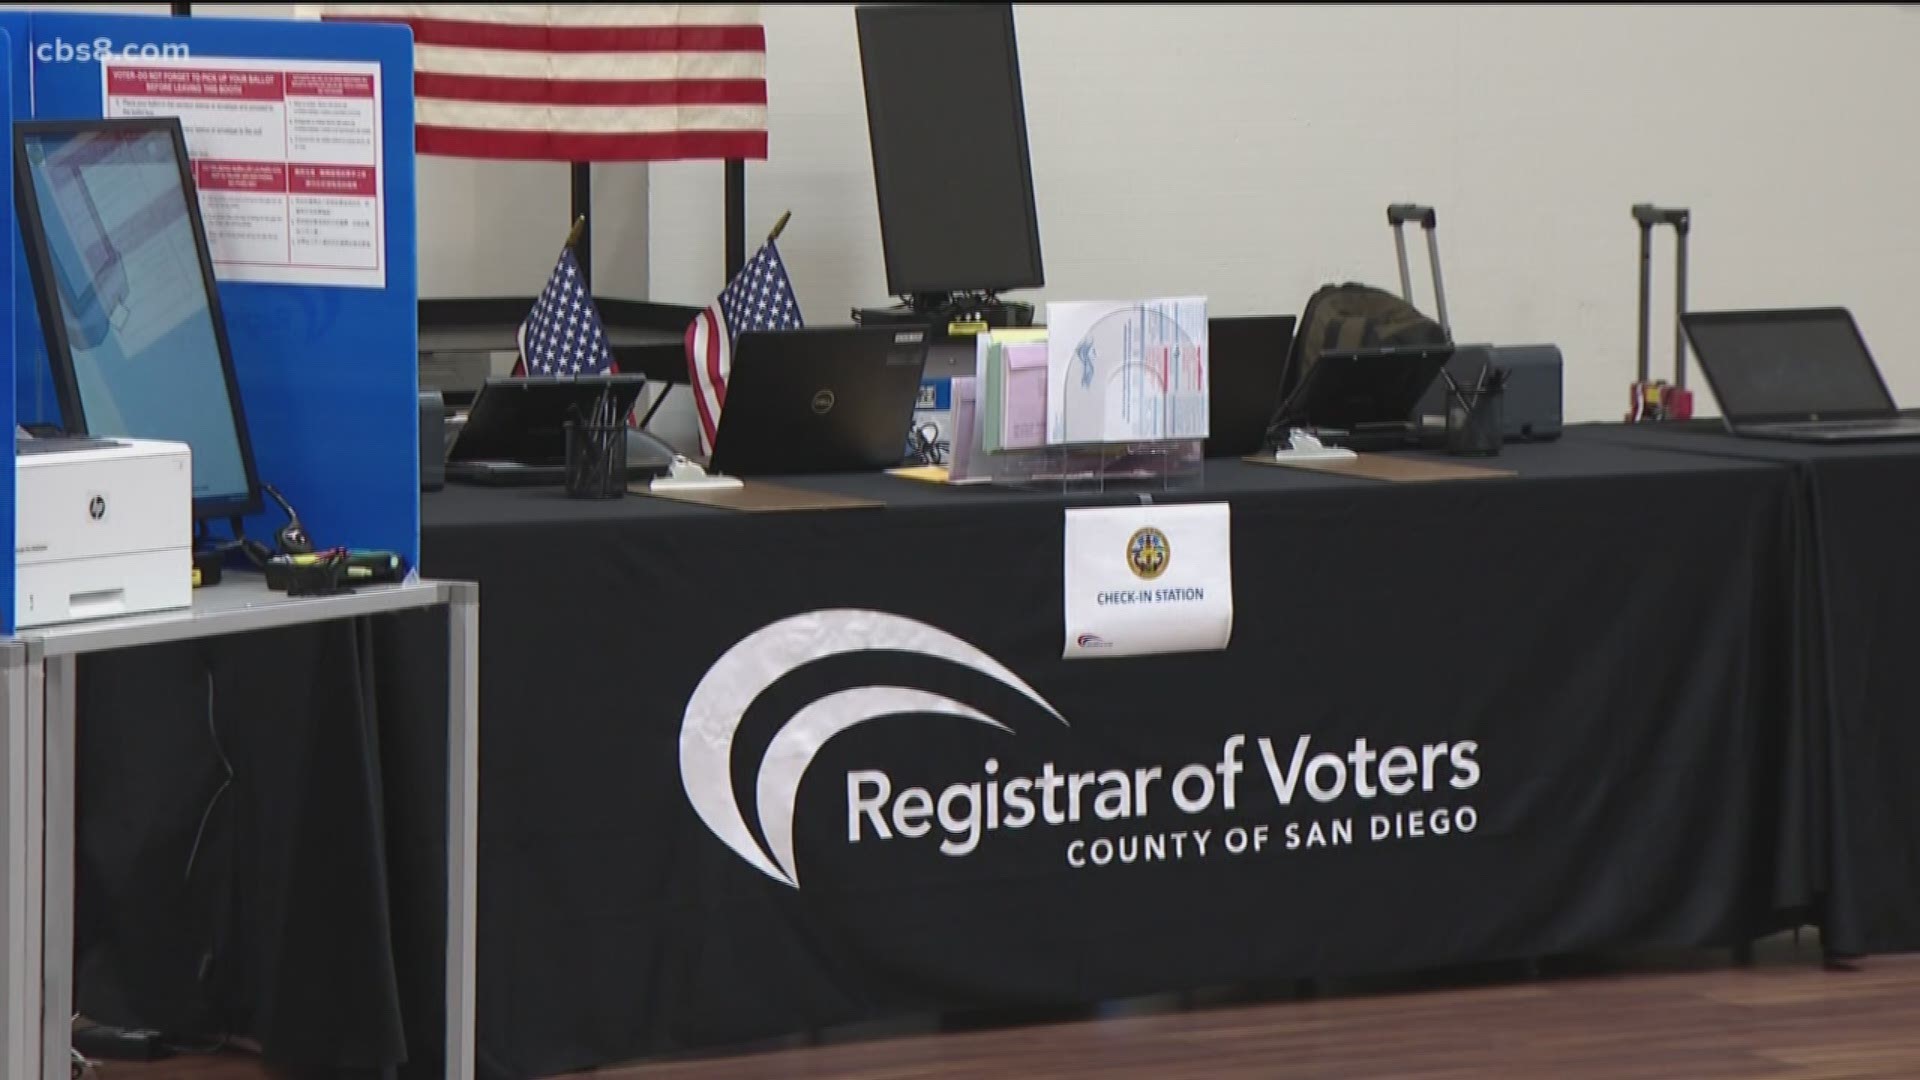 4 satellite locations will open Saturday, and along with the Registrar of Voter’s office will allow voters to register and cast their ballot through Election Day.